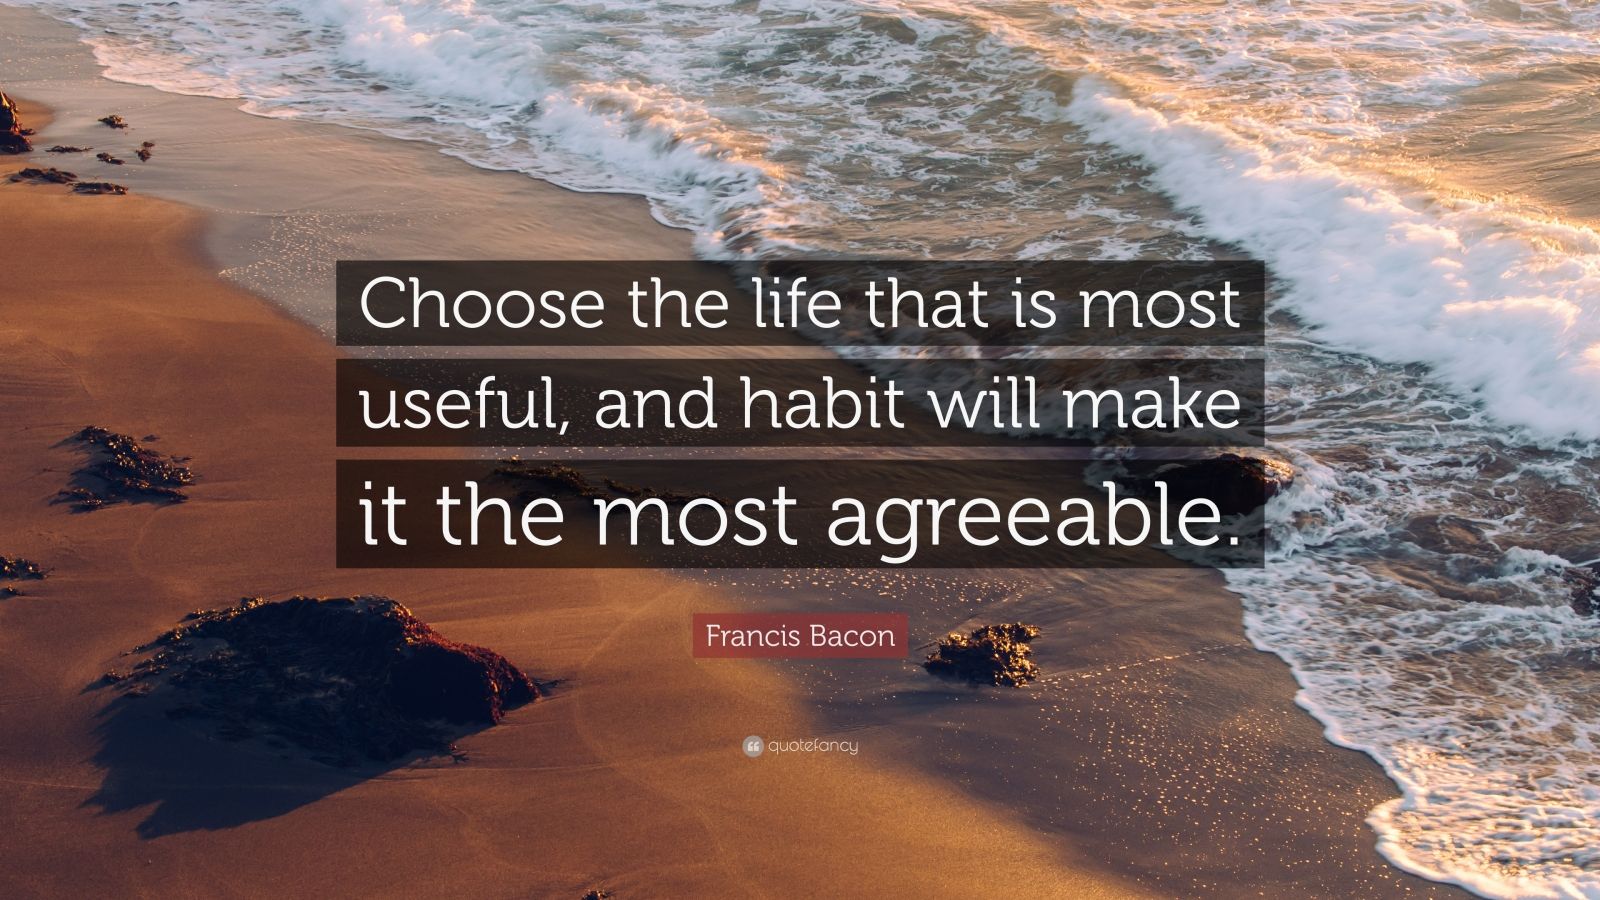 Francis Bacon Quote: “Choose the life that is most useful, and habit